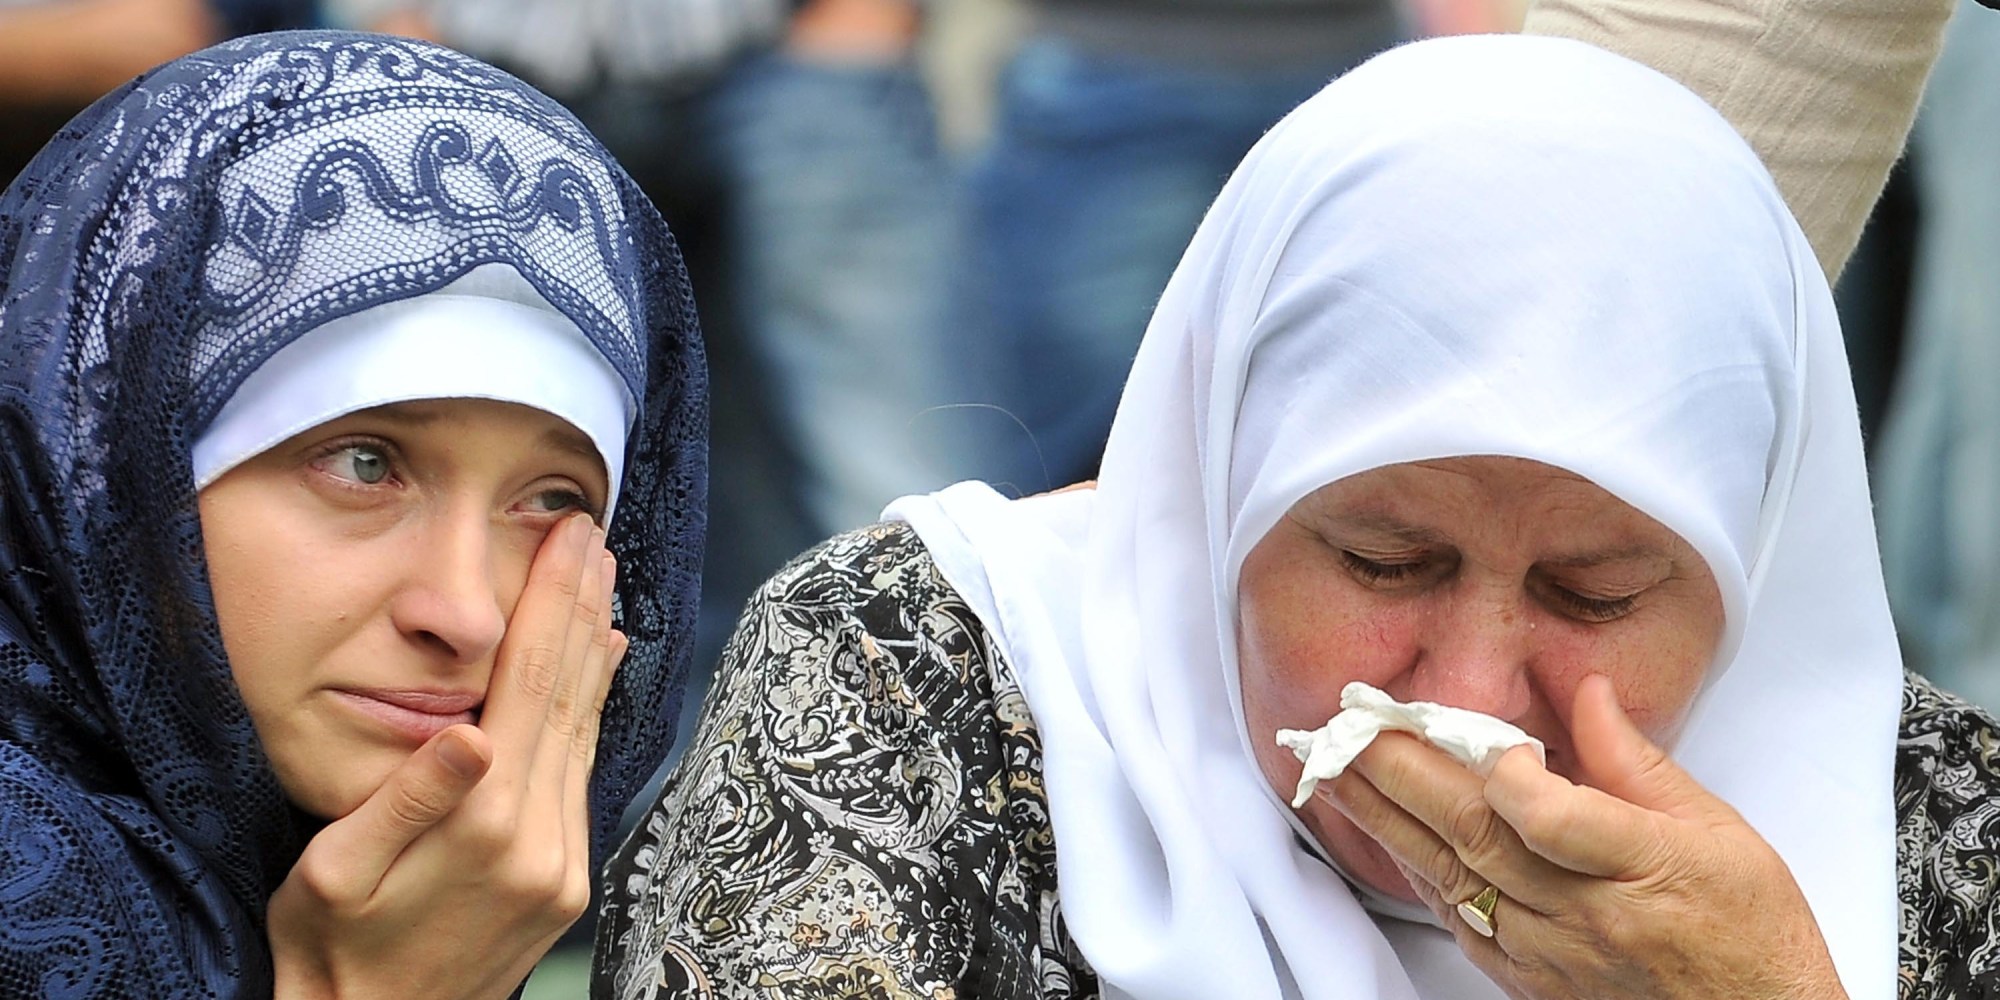 Bosnian Muslim women, cry in front of the coffin of a relative, layed out among others at the Srebrenica-Potocari Genocide Memorial cemetery in the village of Potocari near the eastern-Bosnian town of Srebrenica, on July 11, 2014. Several thousand people gathered on July 11 in Srebrenica for the 19th anniversary of the massacre of some 8,000 Muslim males by ethnic Serbs forces, Europe's worst atrocity since World War II. A total of 175 newly-identified massacre victims will be laid to rest after a commemoration ceremony held in Potocari, just outside the ill-fated Bosnian town. AFP PHOTO / ELVIS BARUKCIC (Photo credit should read ELVIS BARUKCIC/AFP/Getty Images)